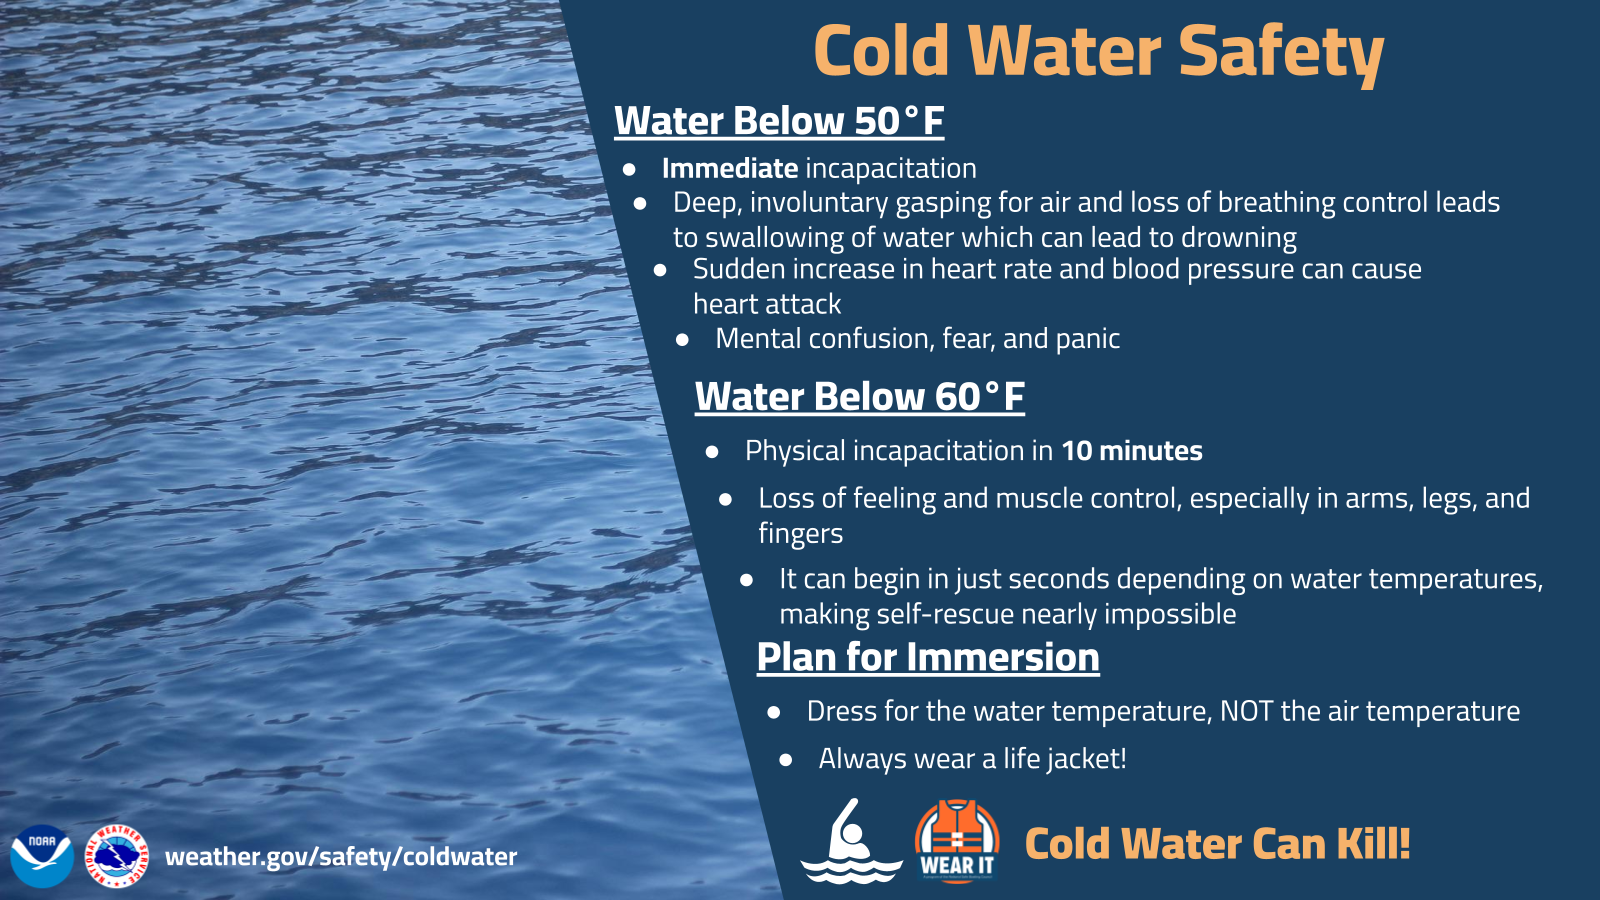 Cold water safety